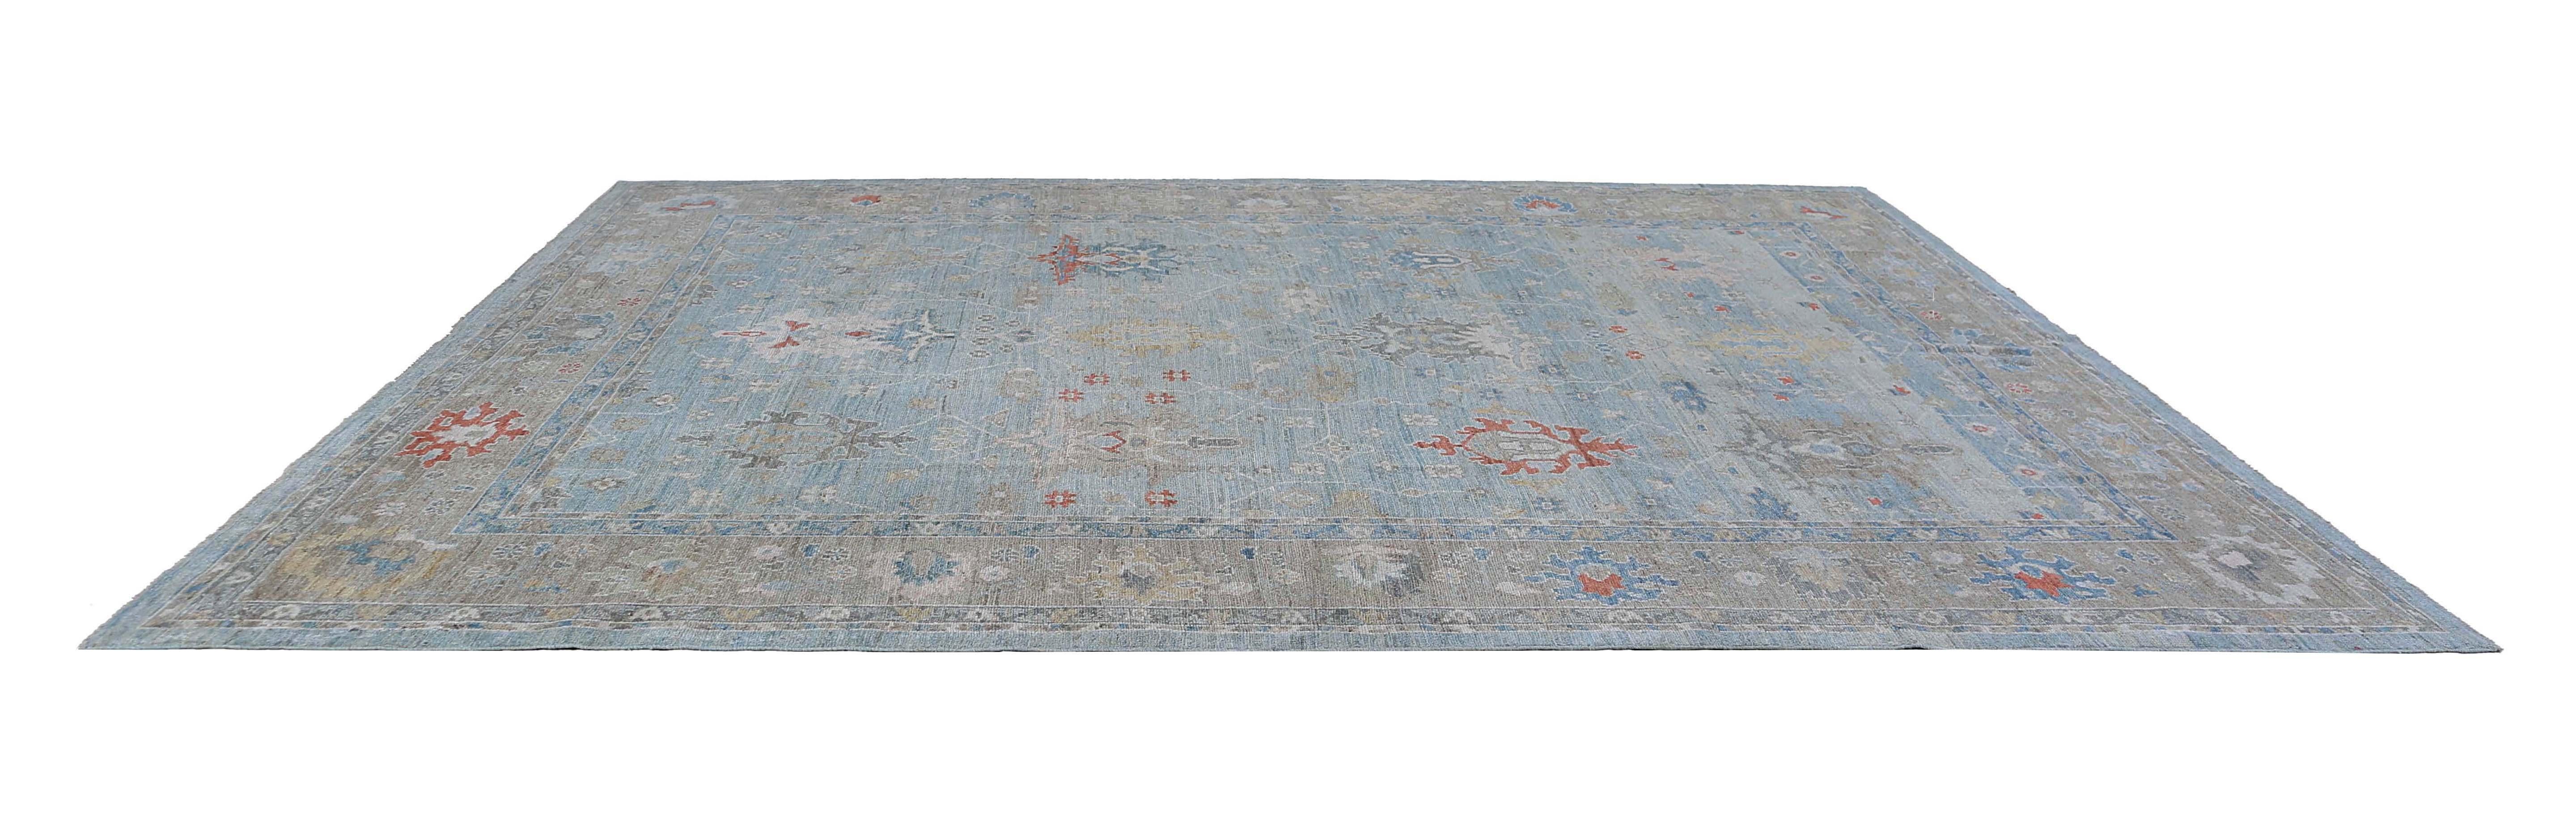 Add a touch of elegance to your home decor with our beautiful 8'4'' x 8'8'' Sultanabad rug, handwoven from premium quality wool to ensure durability and comfort. The rug's intricate design features a beautiful blend of floral and geometric patterns